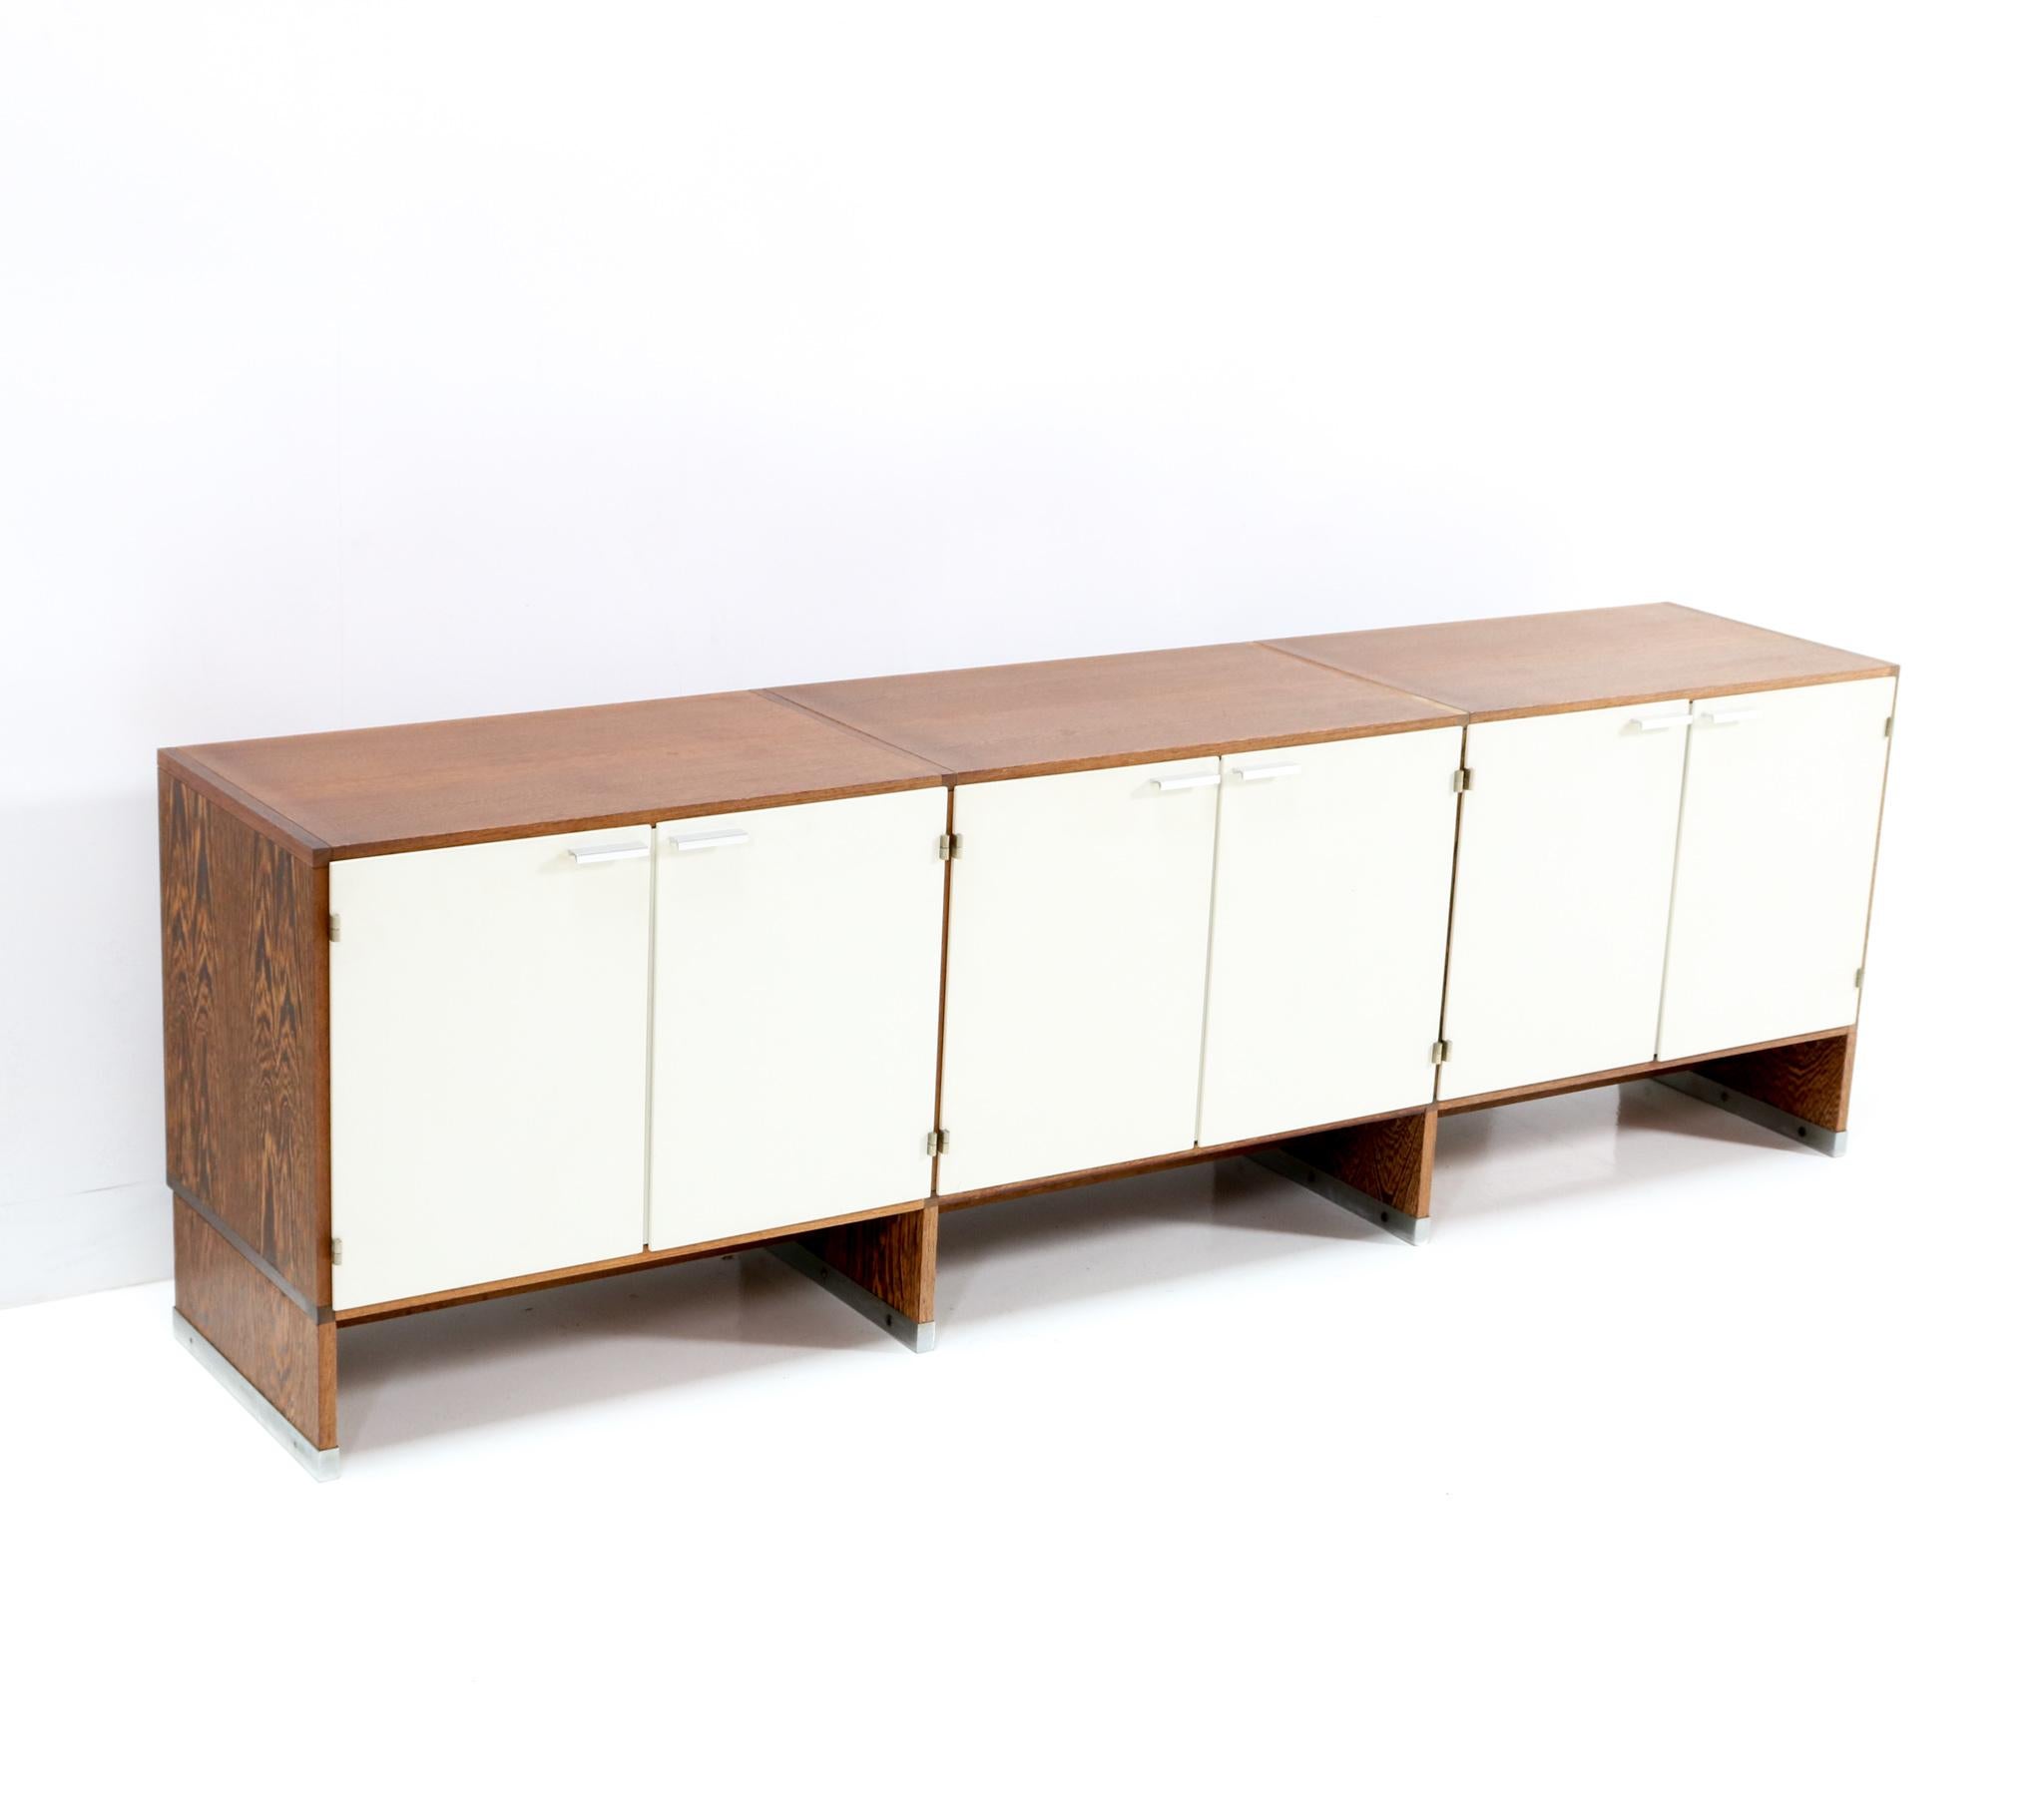 Dutch Wengé Mid-Century Modern Credenza or Sideboard by Cees Braakman for Pastoe, 1964